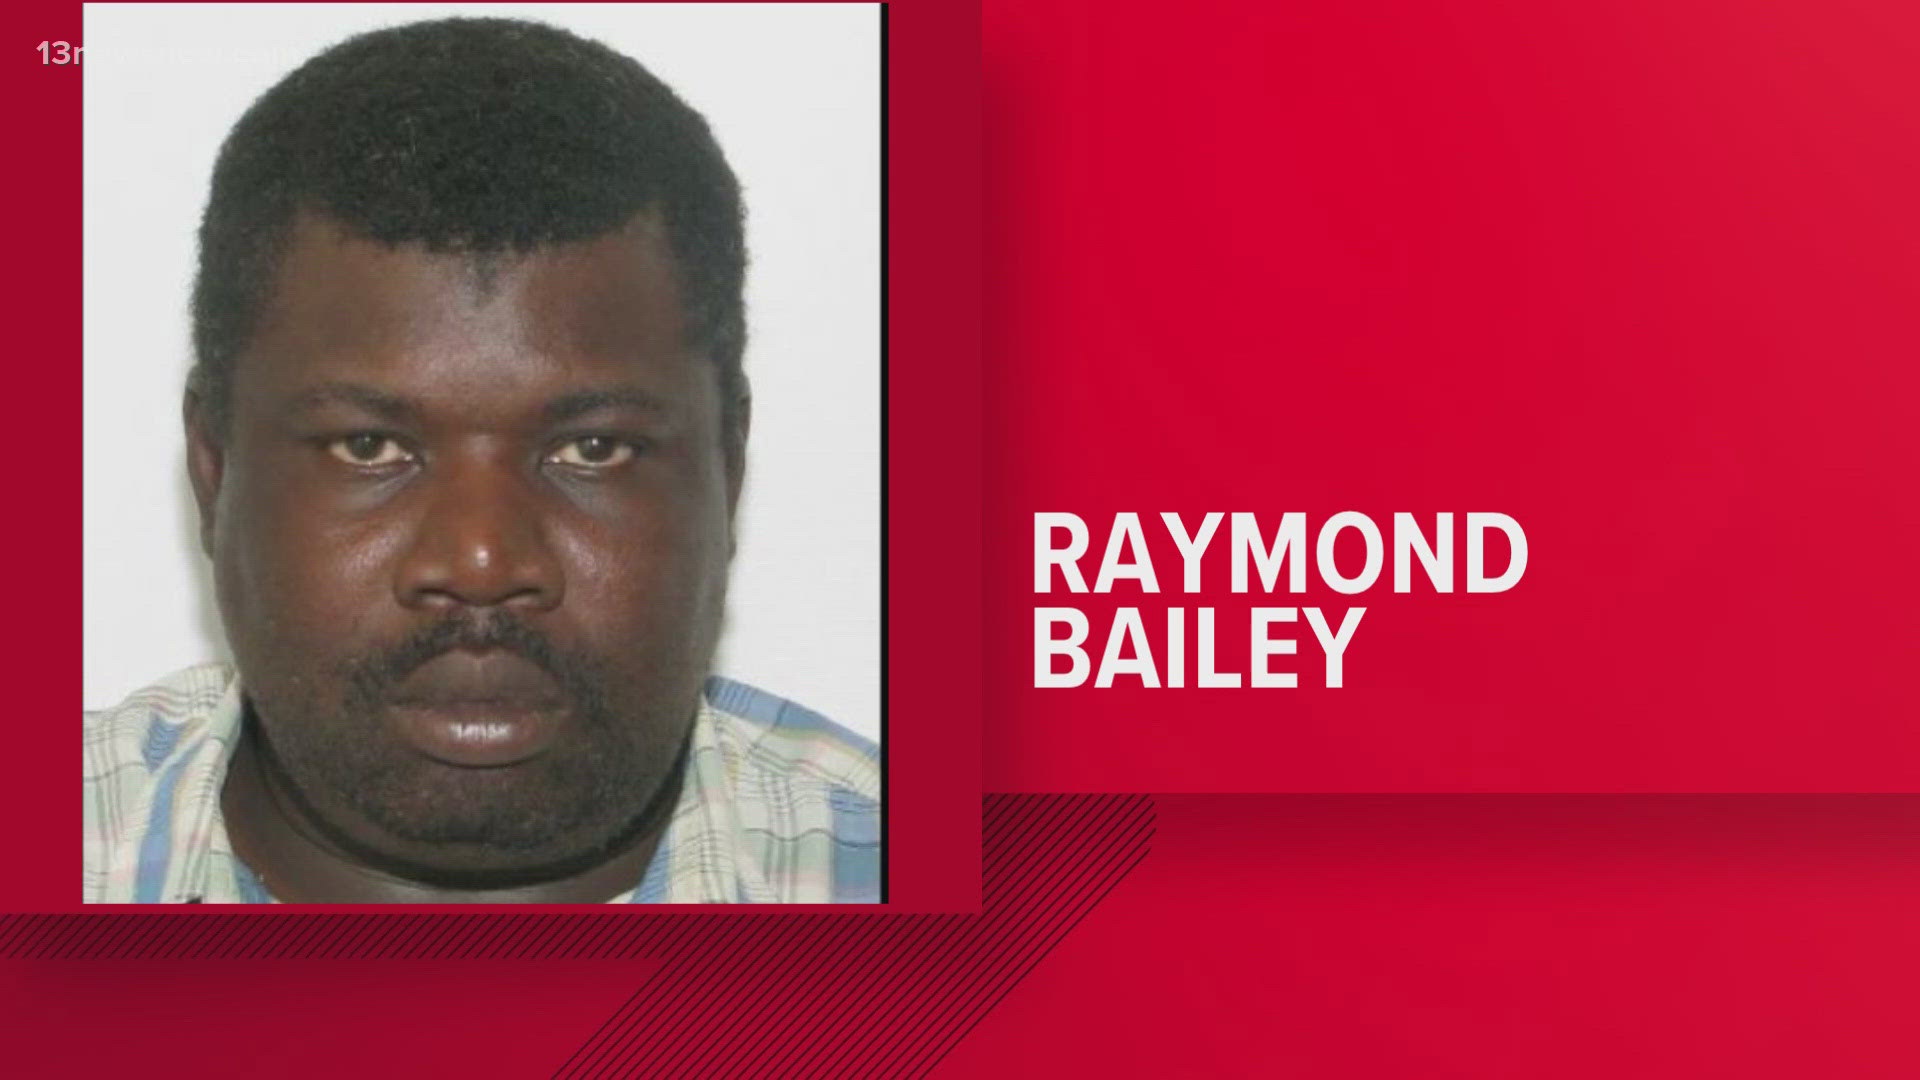 Raymond Bailey was last seen at his residence in the 3200 block of Meadows Way in Chesapeake, according to police.